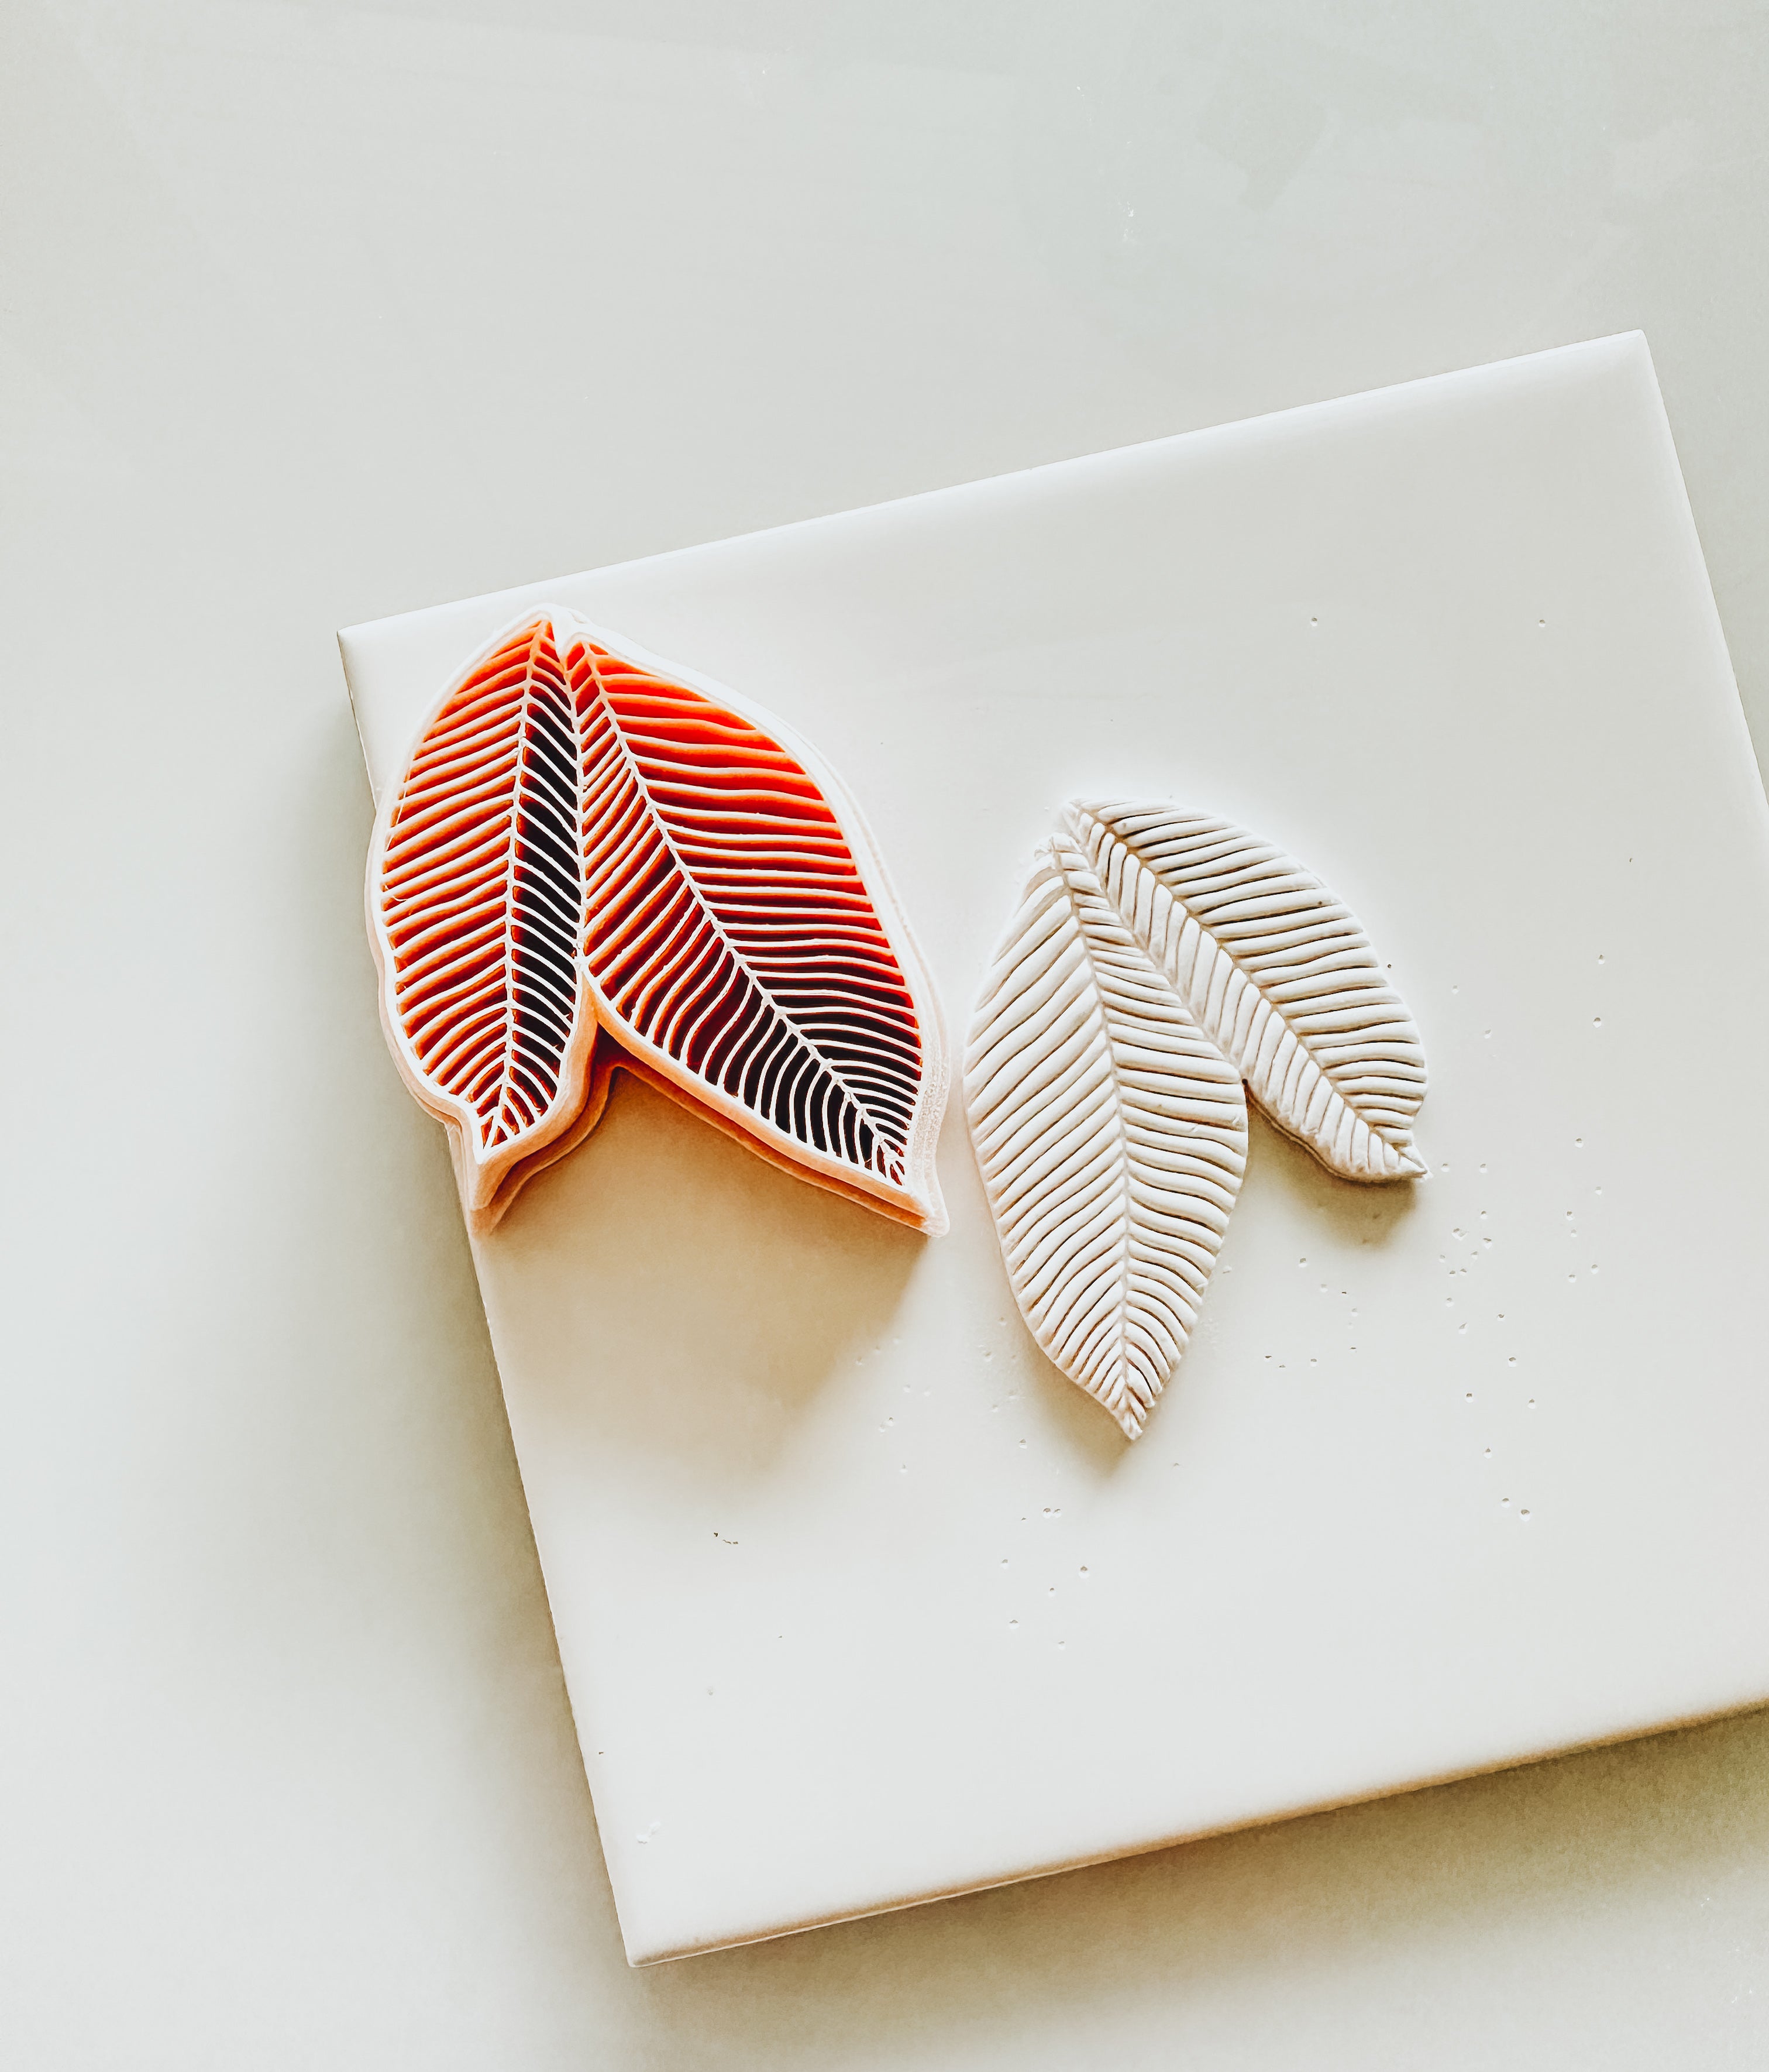 Embossed Tropical Leaf Cluster Clay Cutter